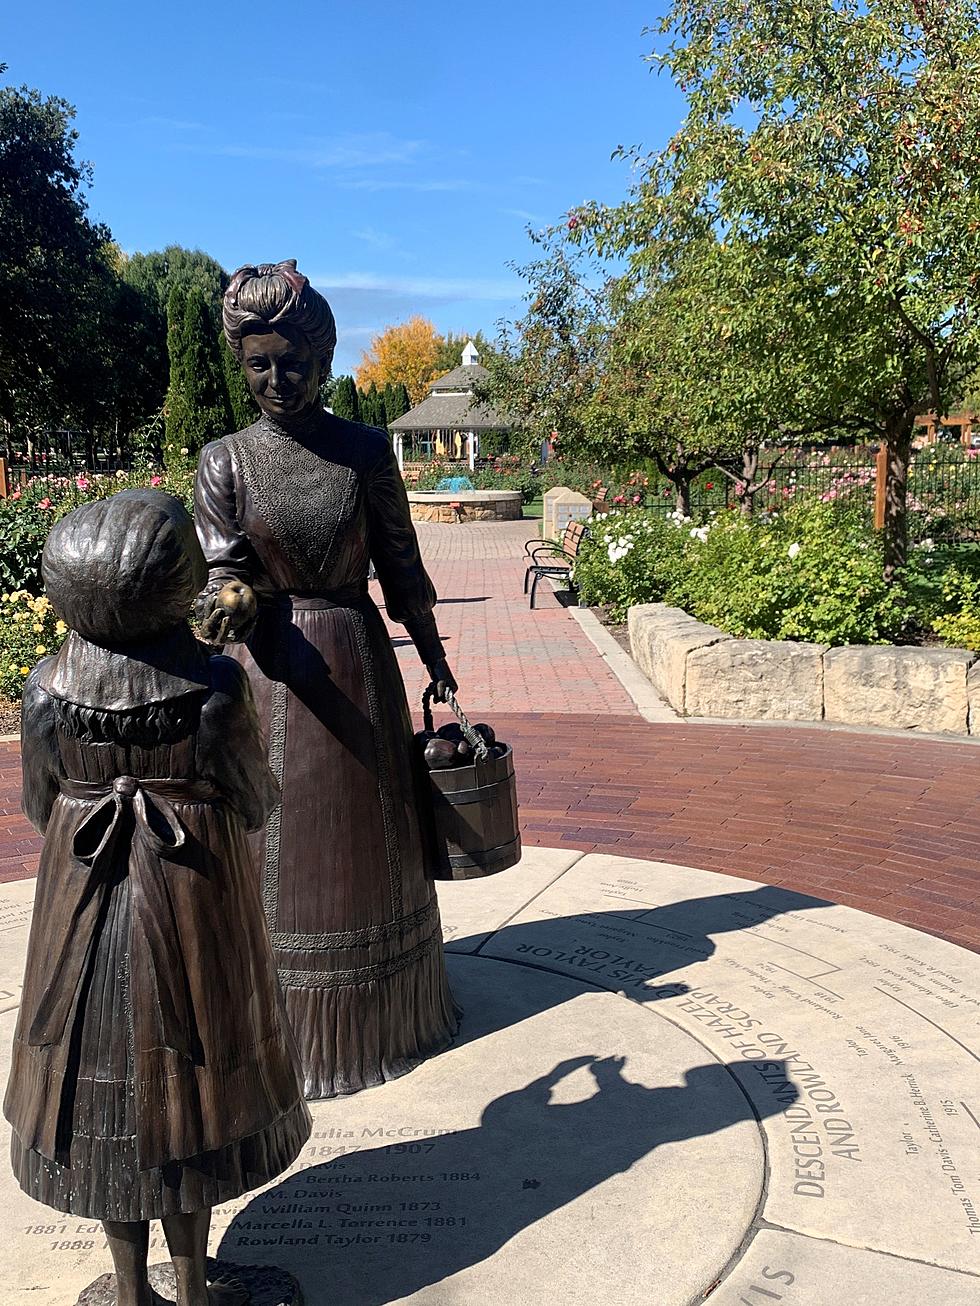 Boise Parks Department Honors Trailblazing Idaho Women with “Ribbon of Jewels”